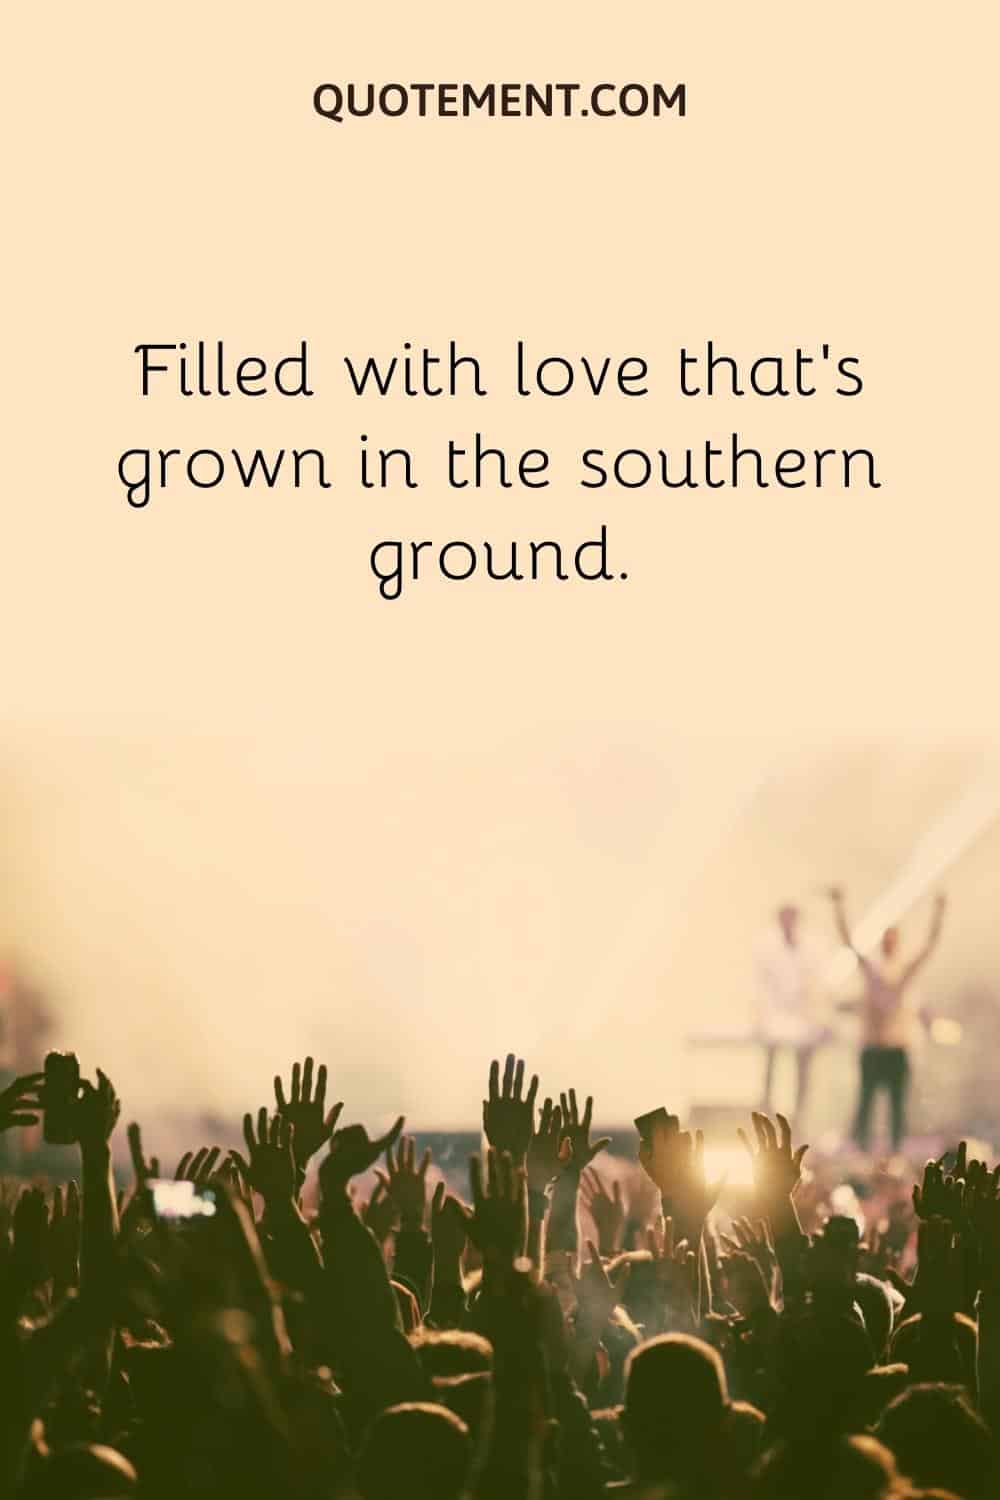 Filled with love that's grown in the southern ground